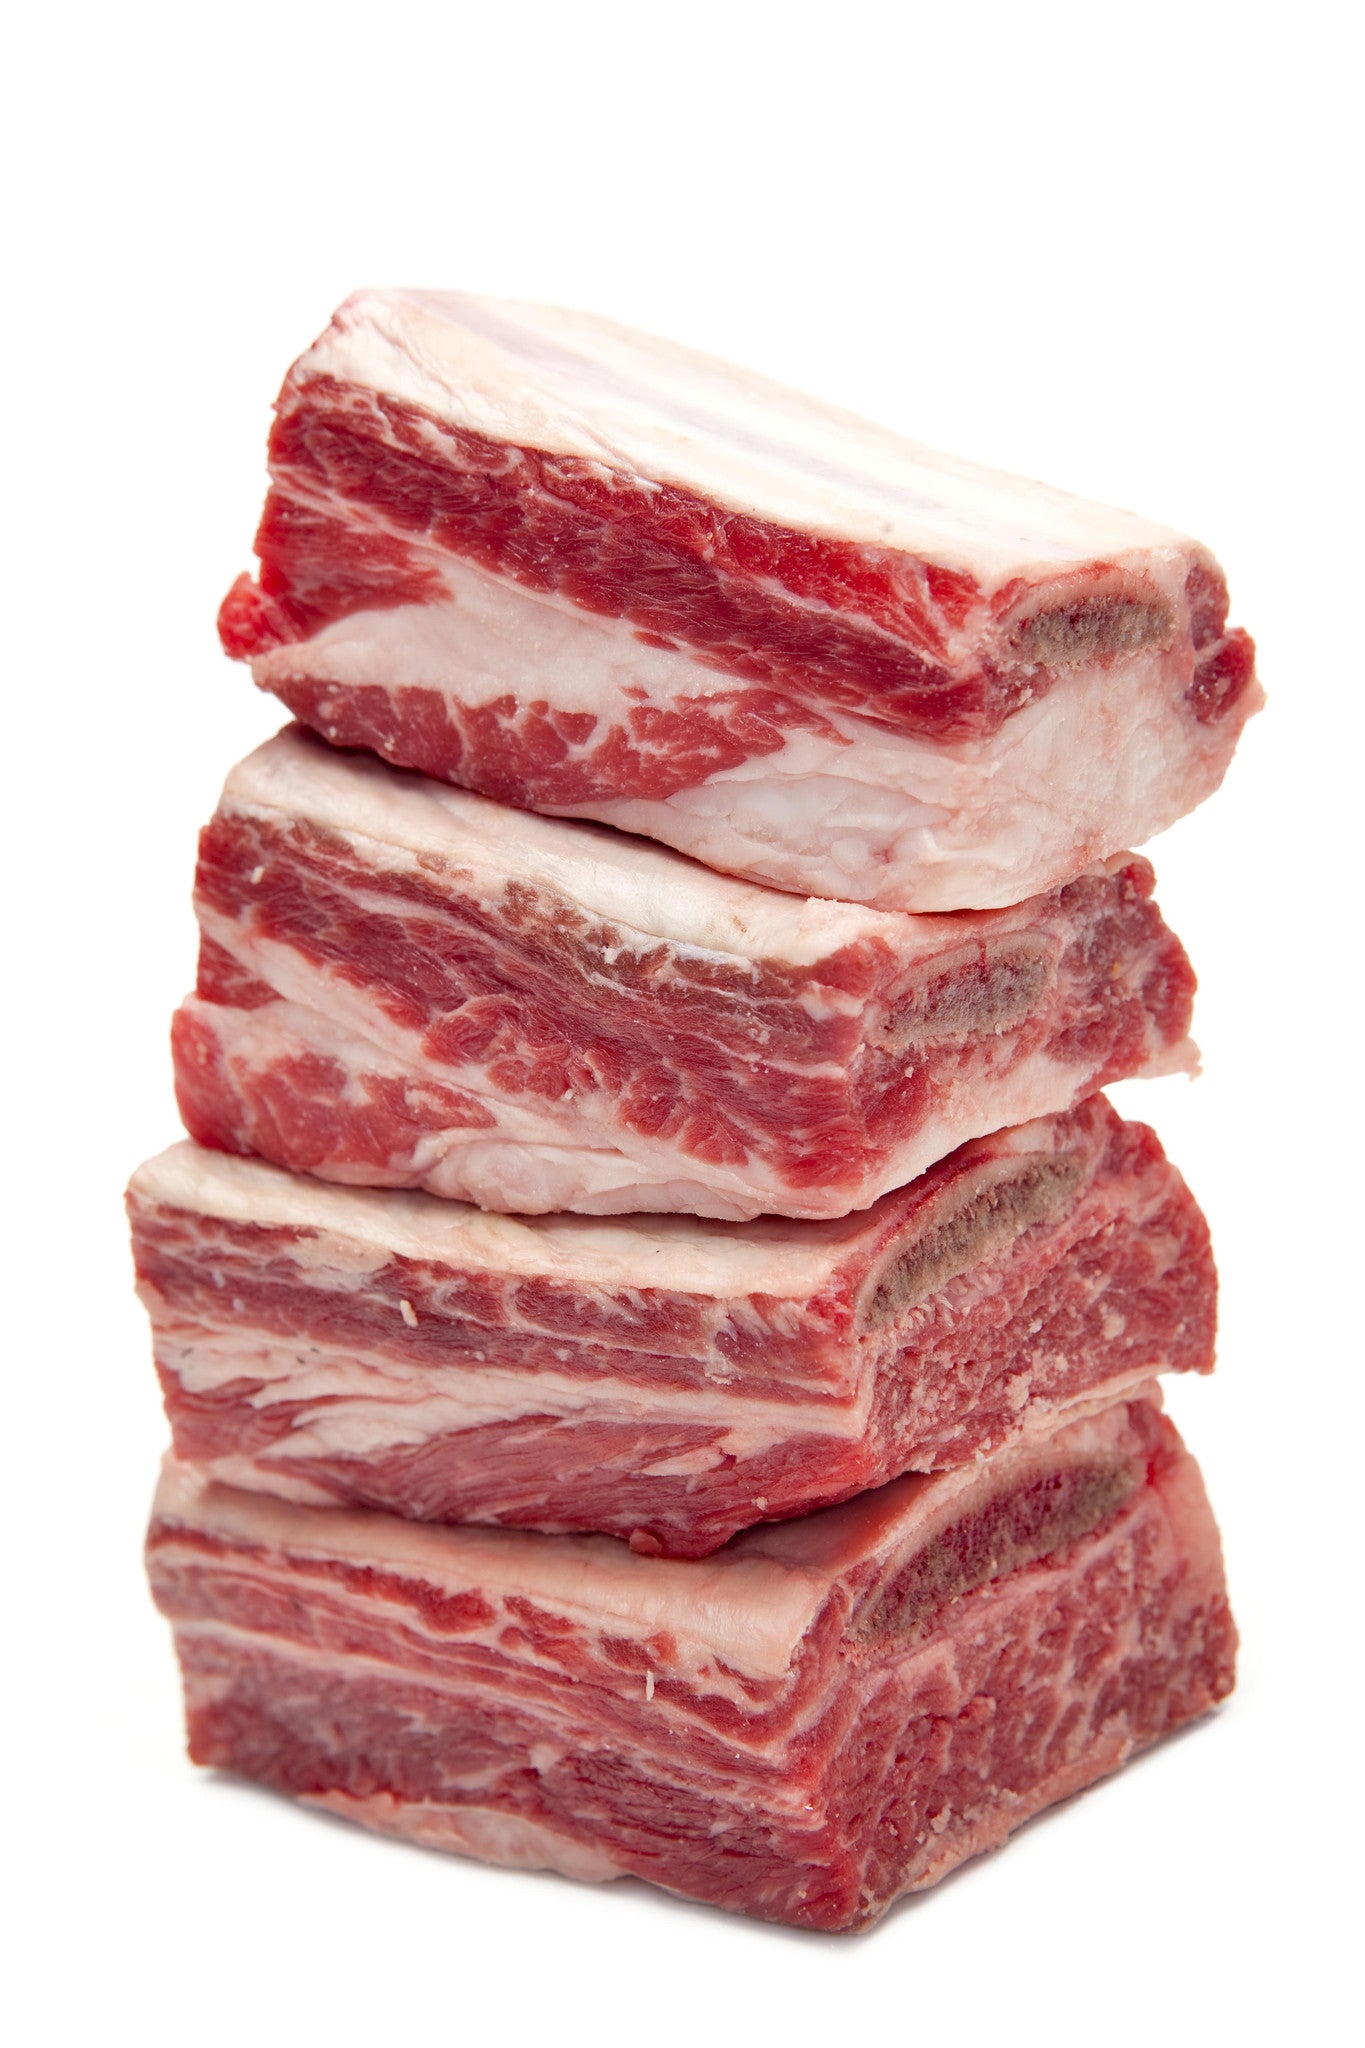 Beef Short Ribs - The Cheshire Butcher